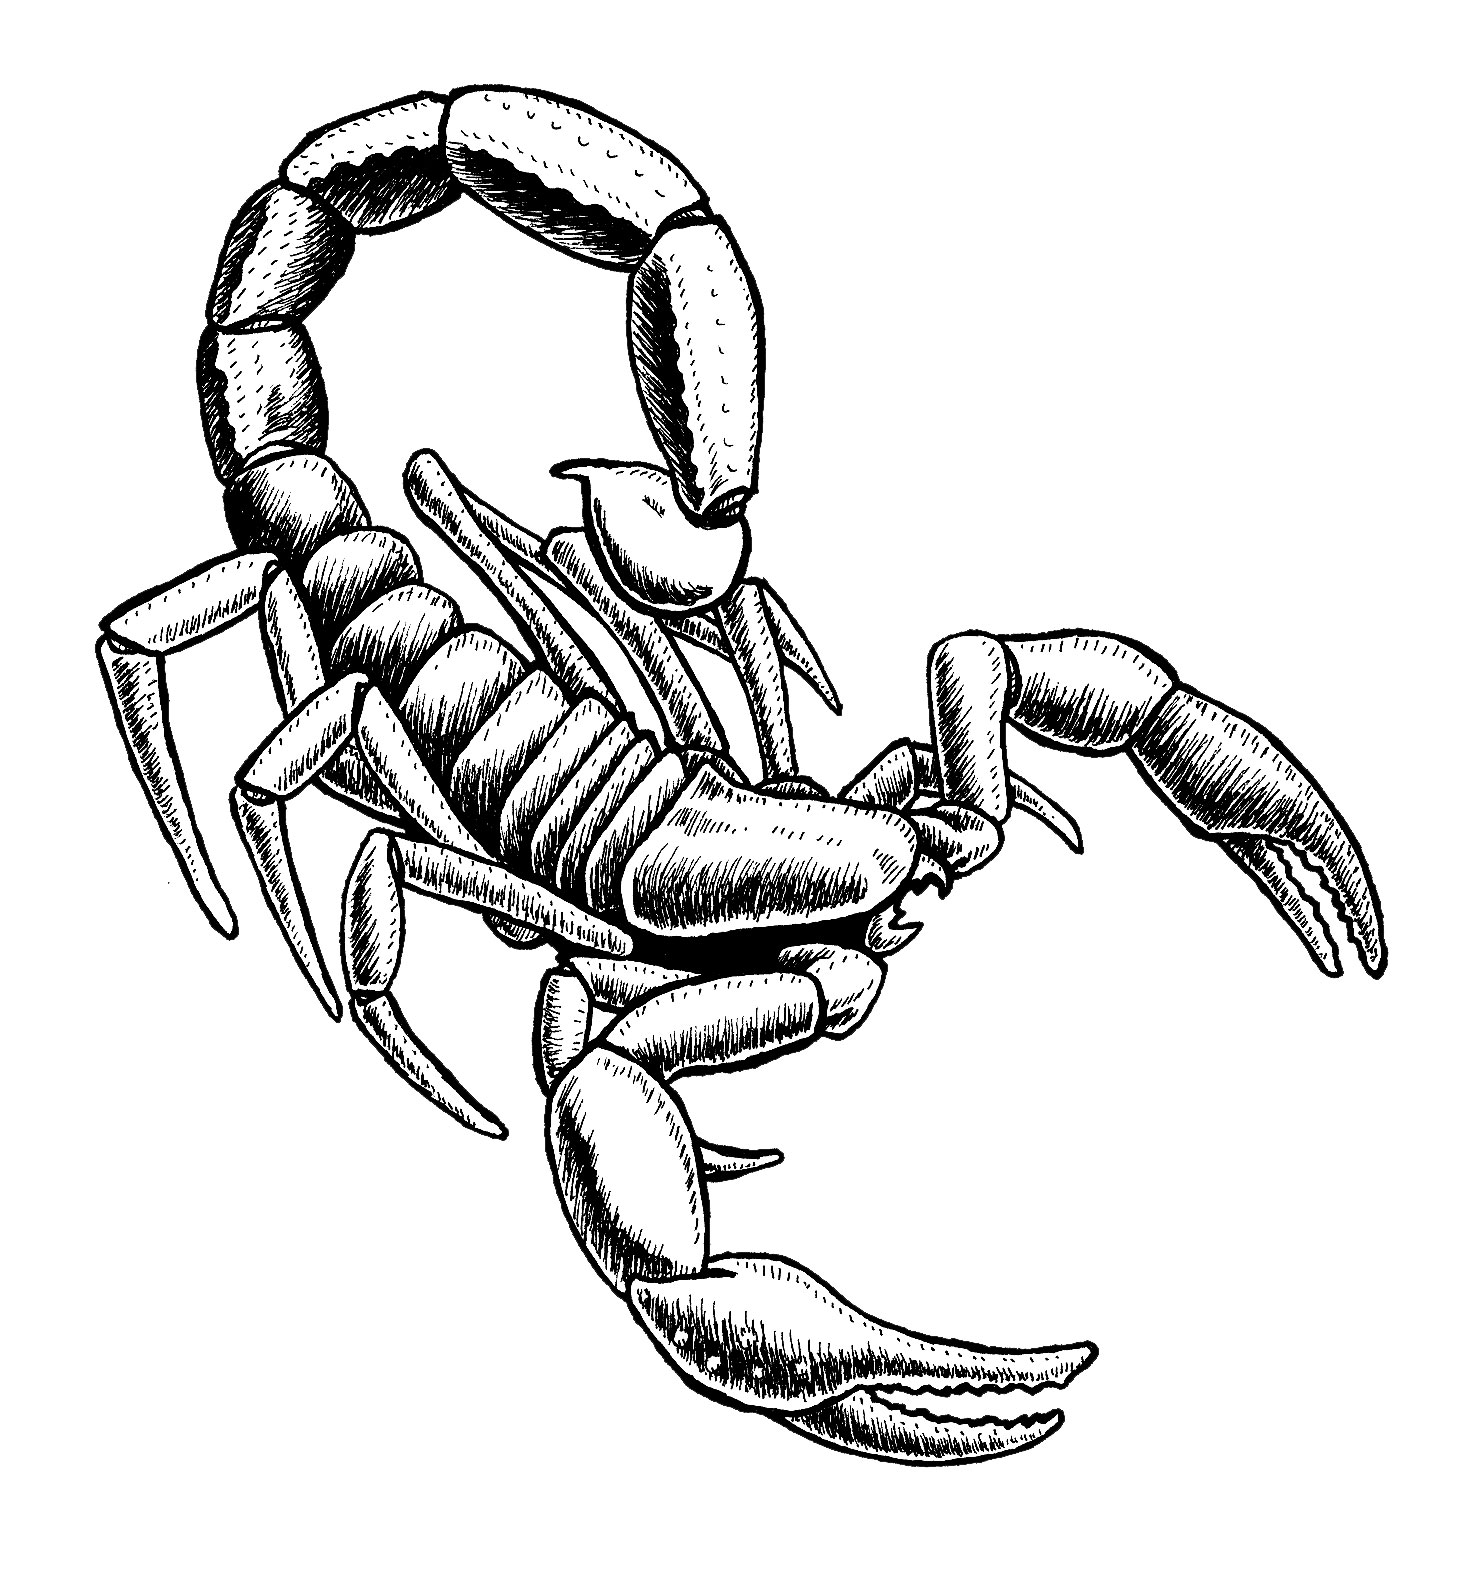 A drawing of a scorpion